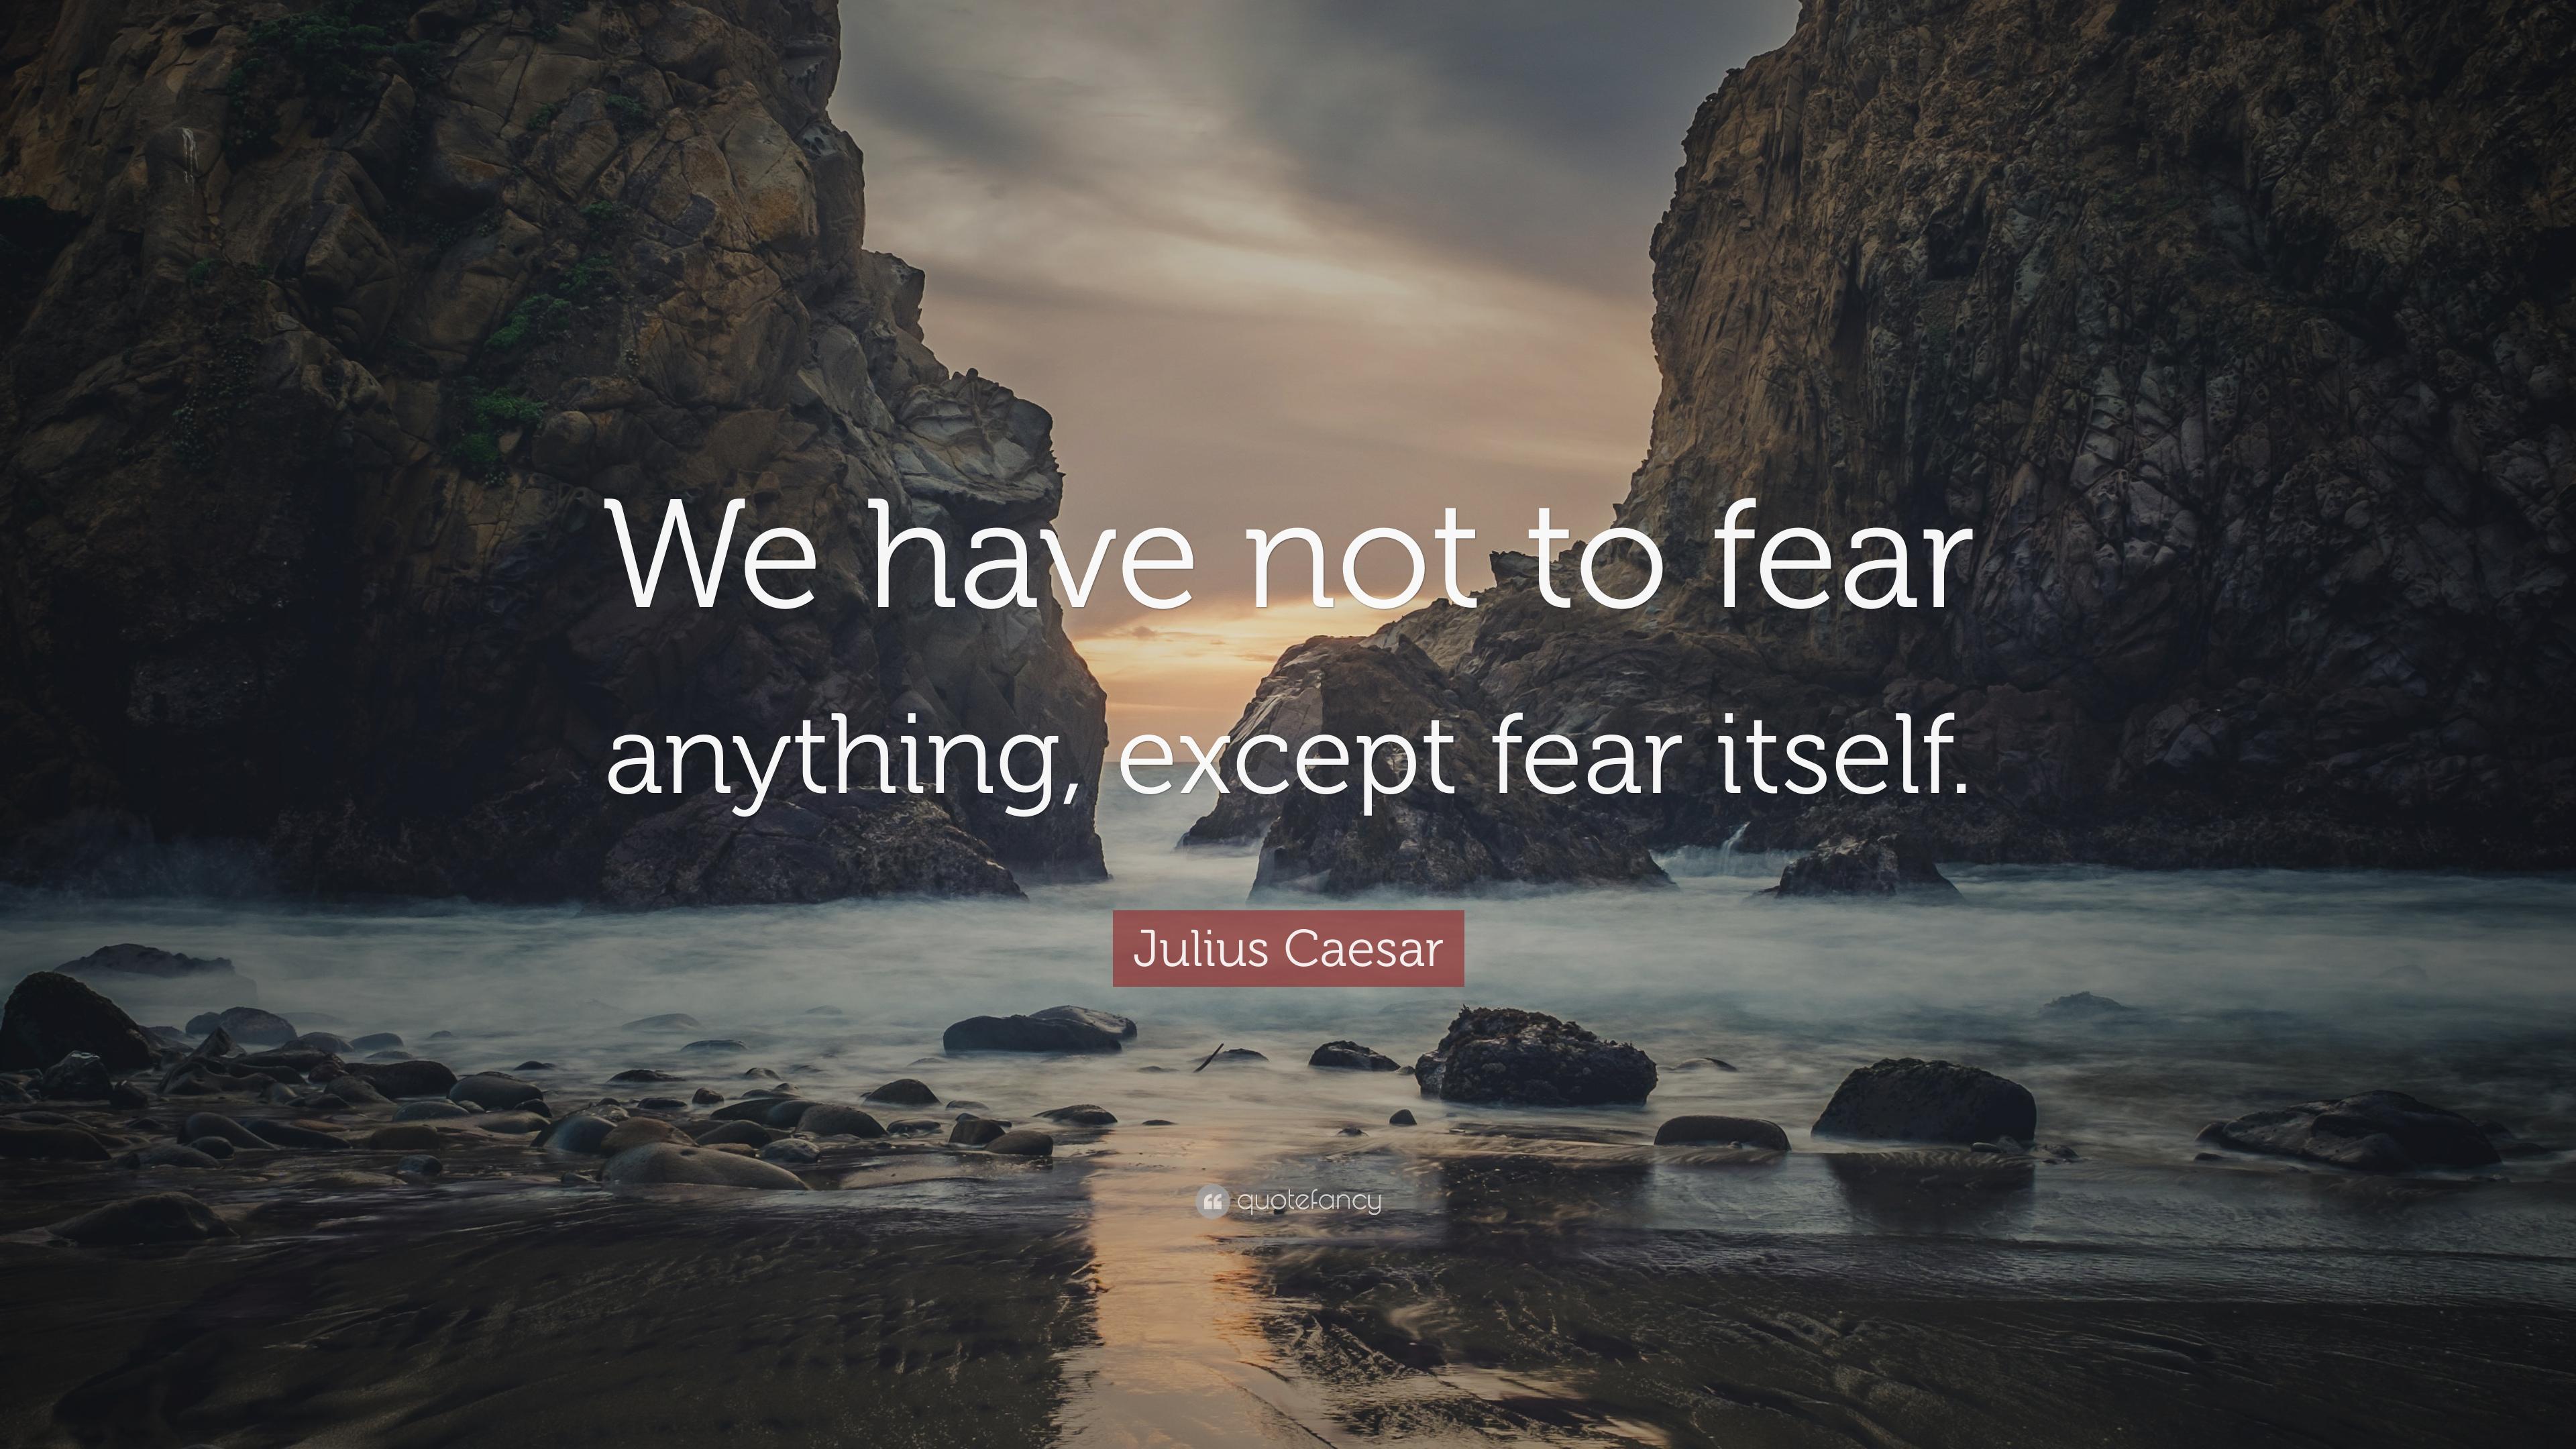 Julius Caesar Quote: “We have not to fear anything, except fear